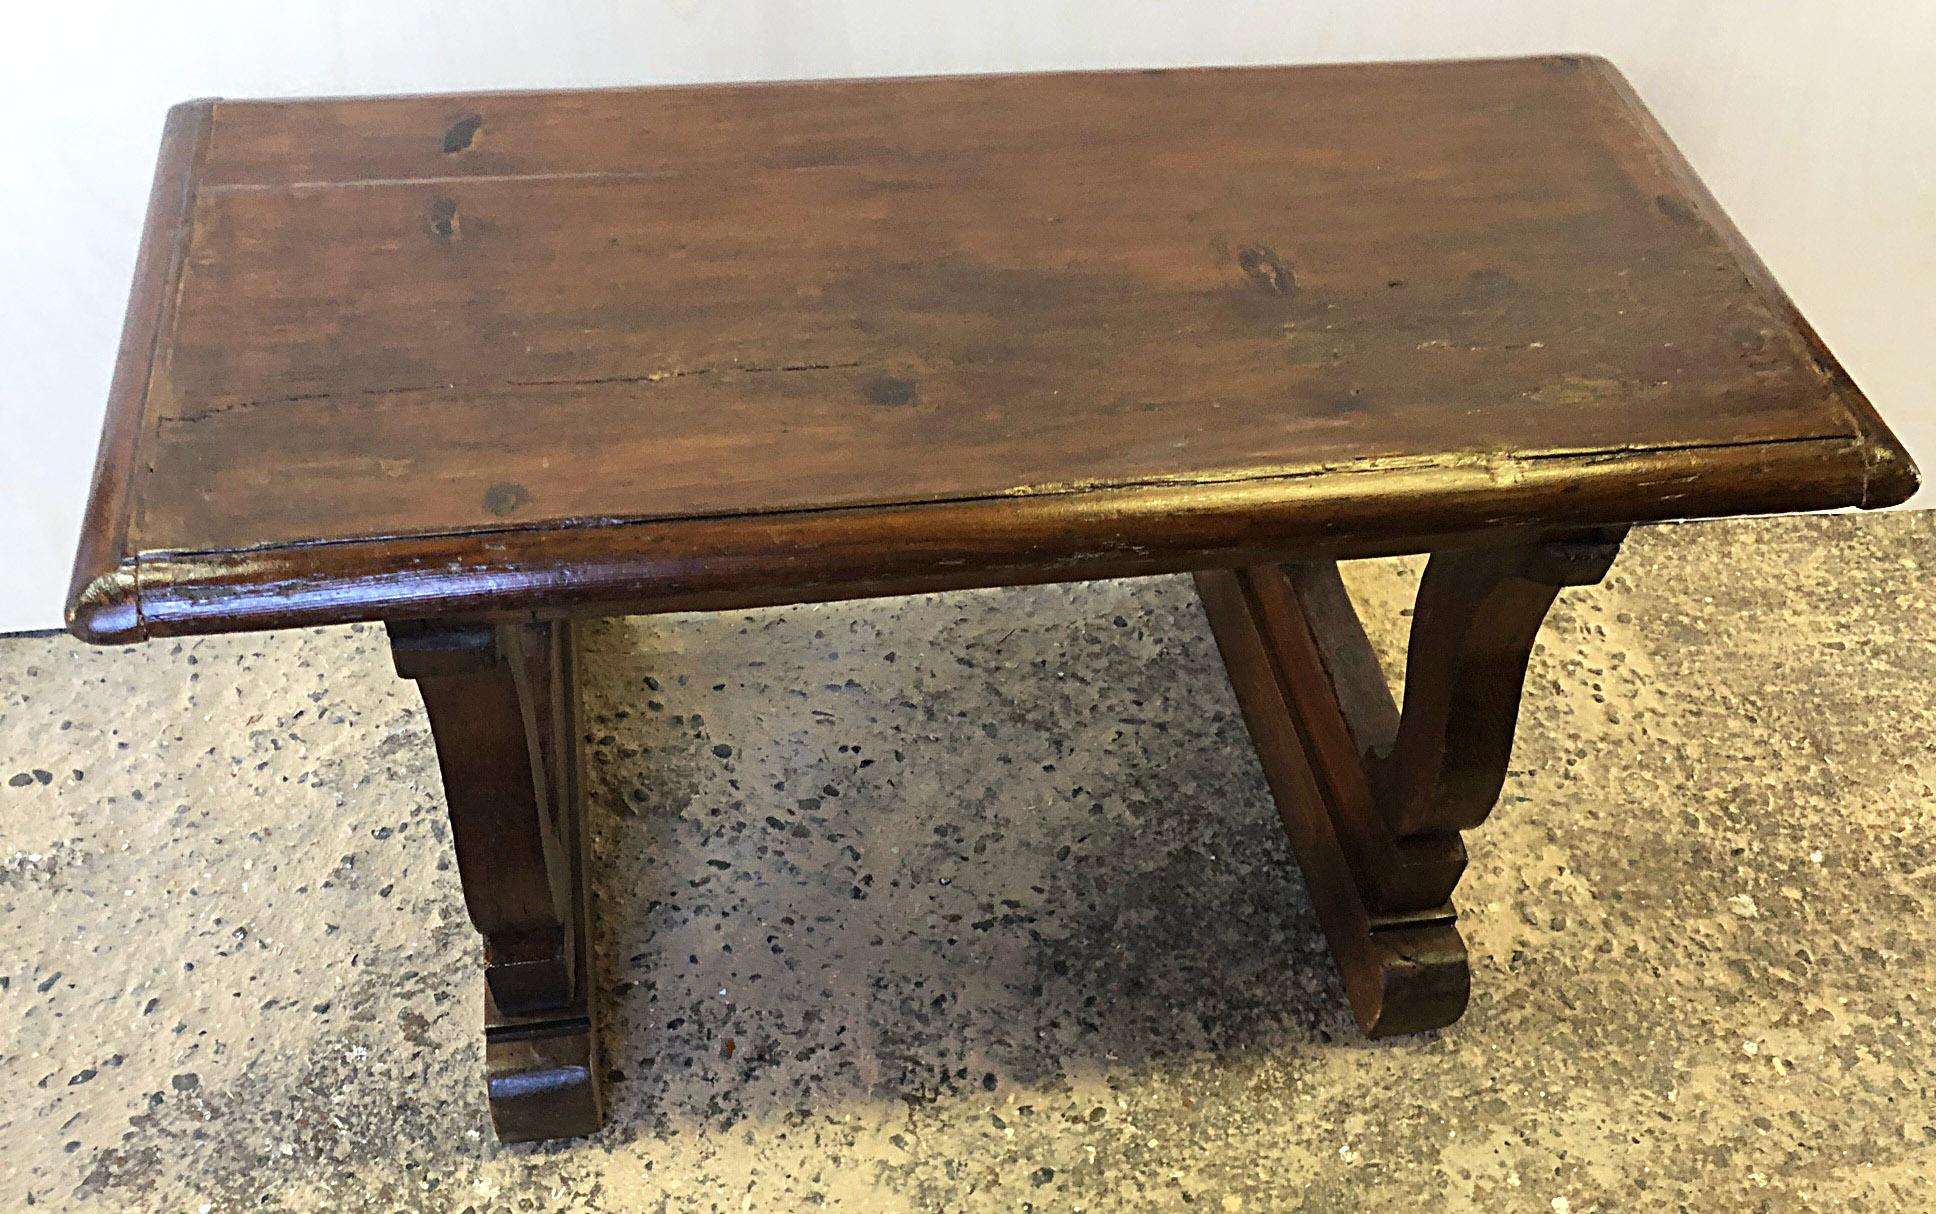 Italian sofa table from 1900 in solid fir, very sturdy, rustic.
Honey color.
At the foot of the base it has two repairs.
Top thickness 3.5 cm.